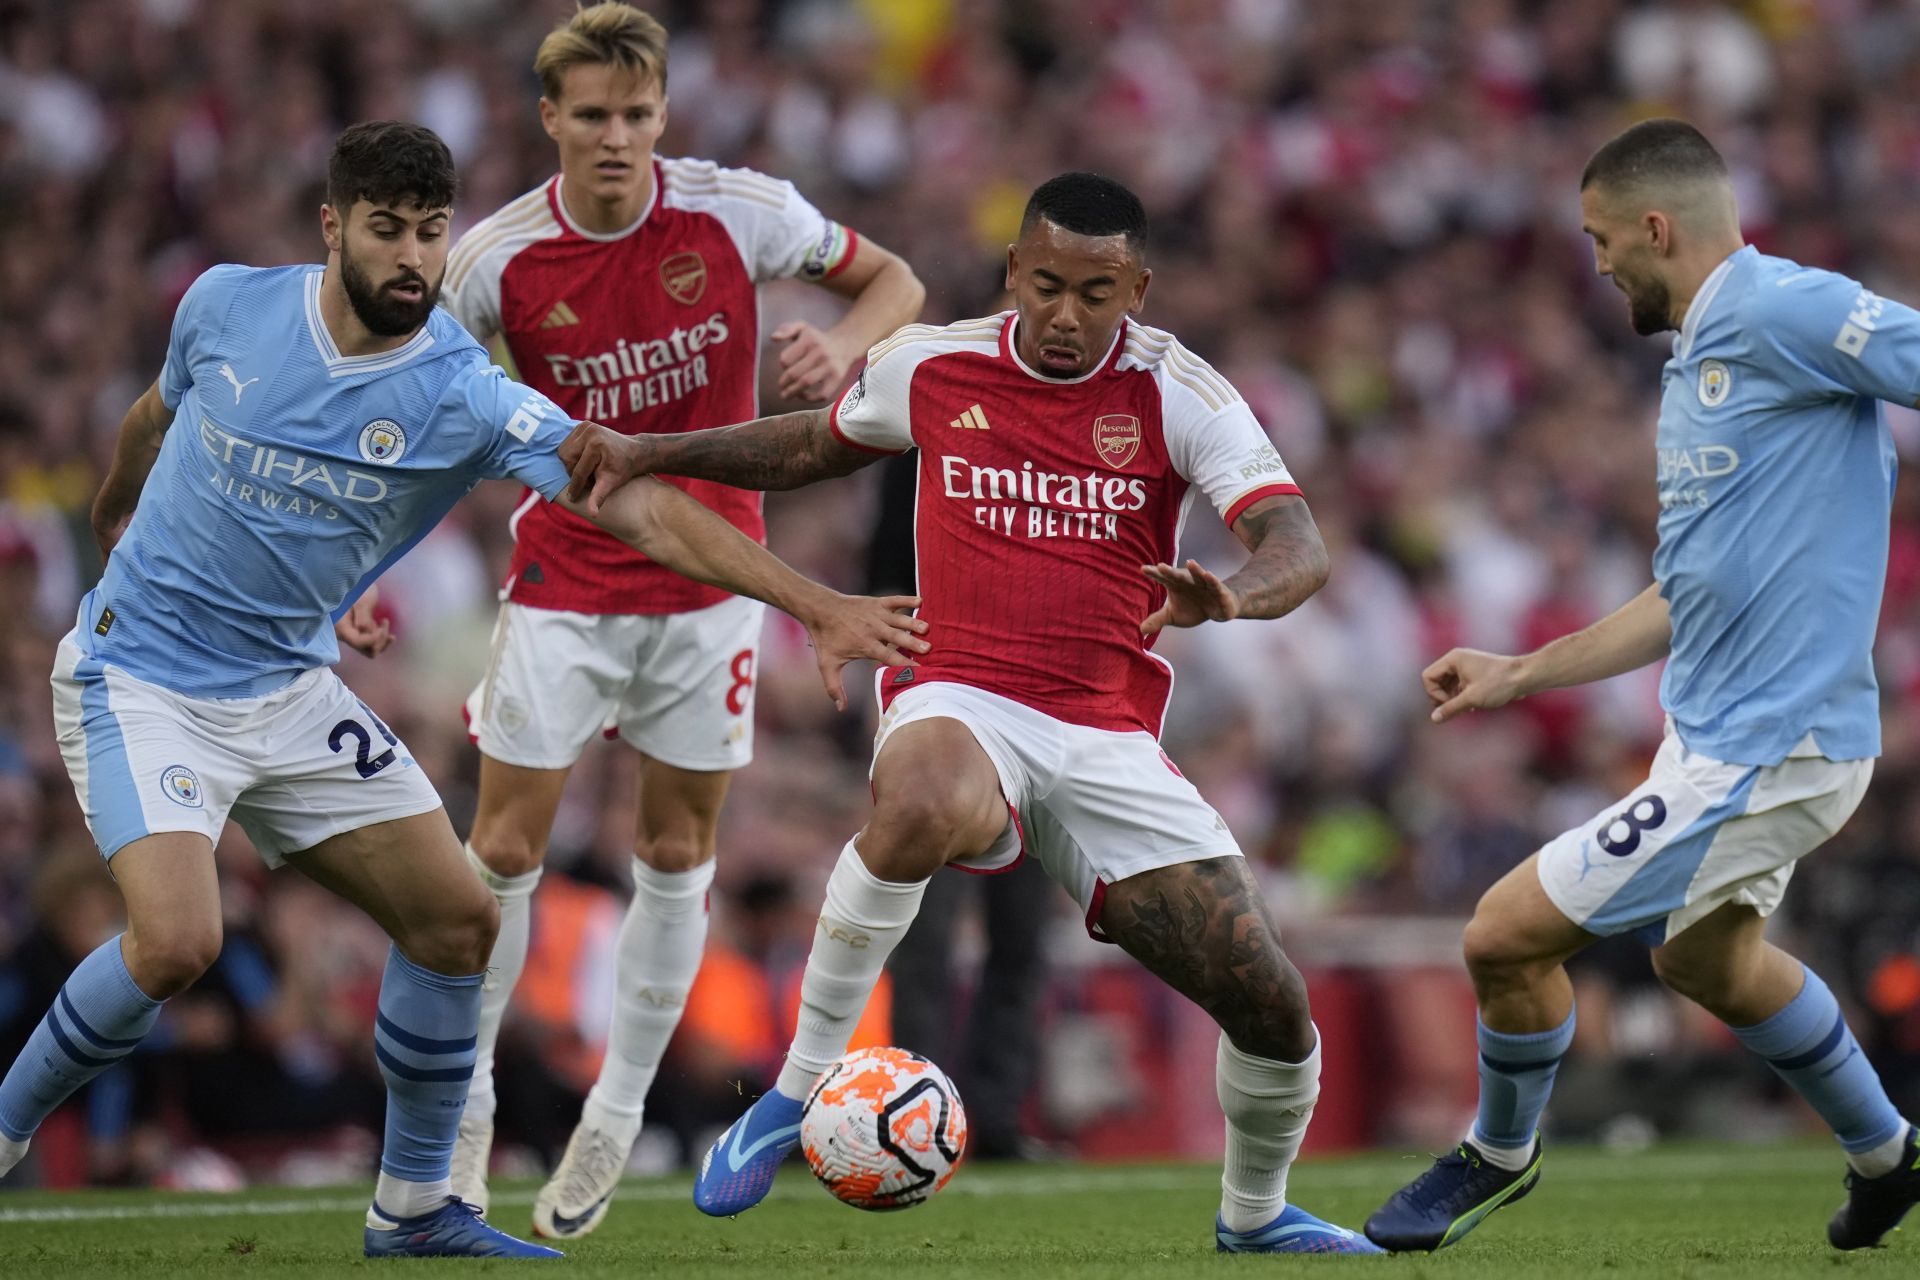 Arsenal and Manchester City players contesting for the ball.